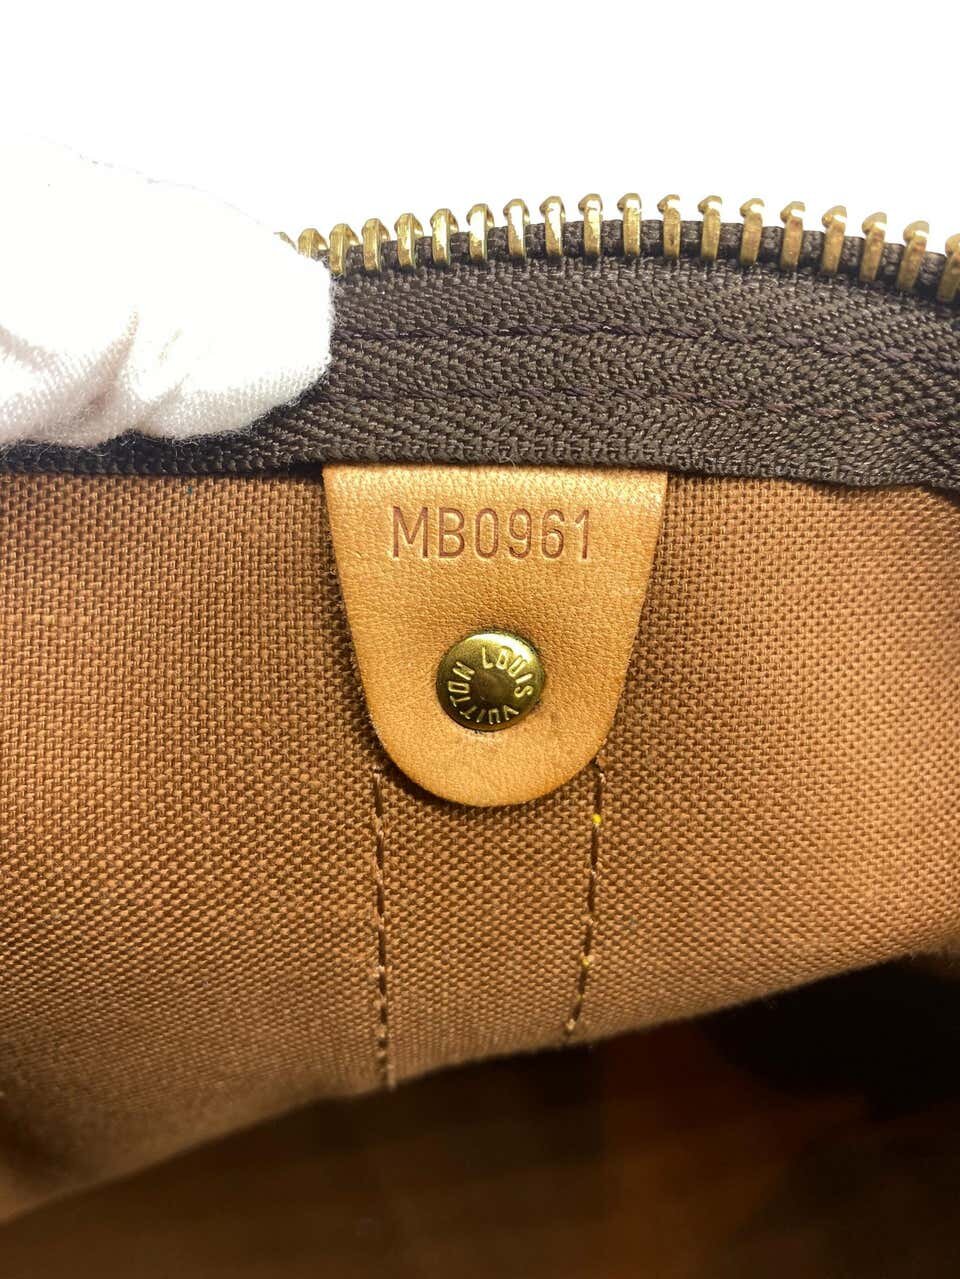 Date Code & Stamp] Louis Vuitton One handle